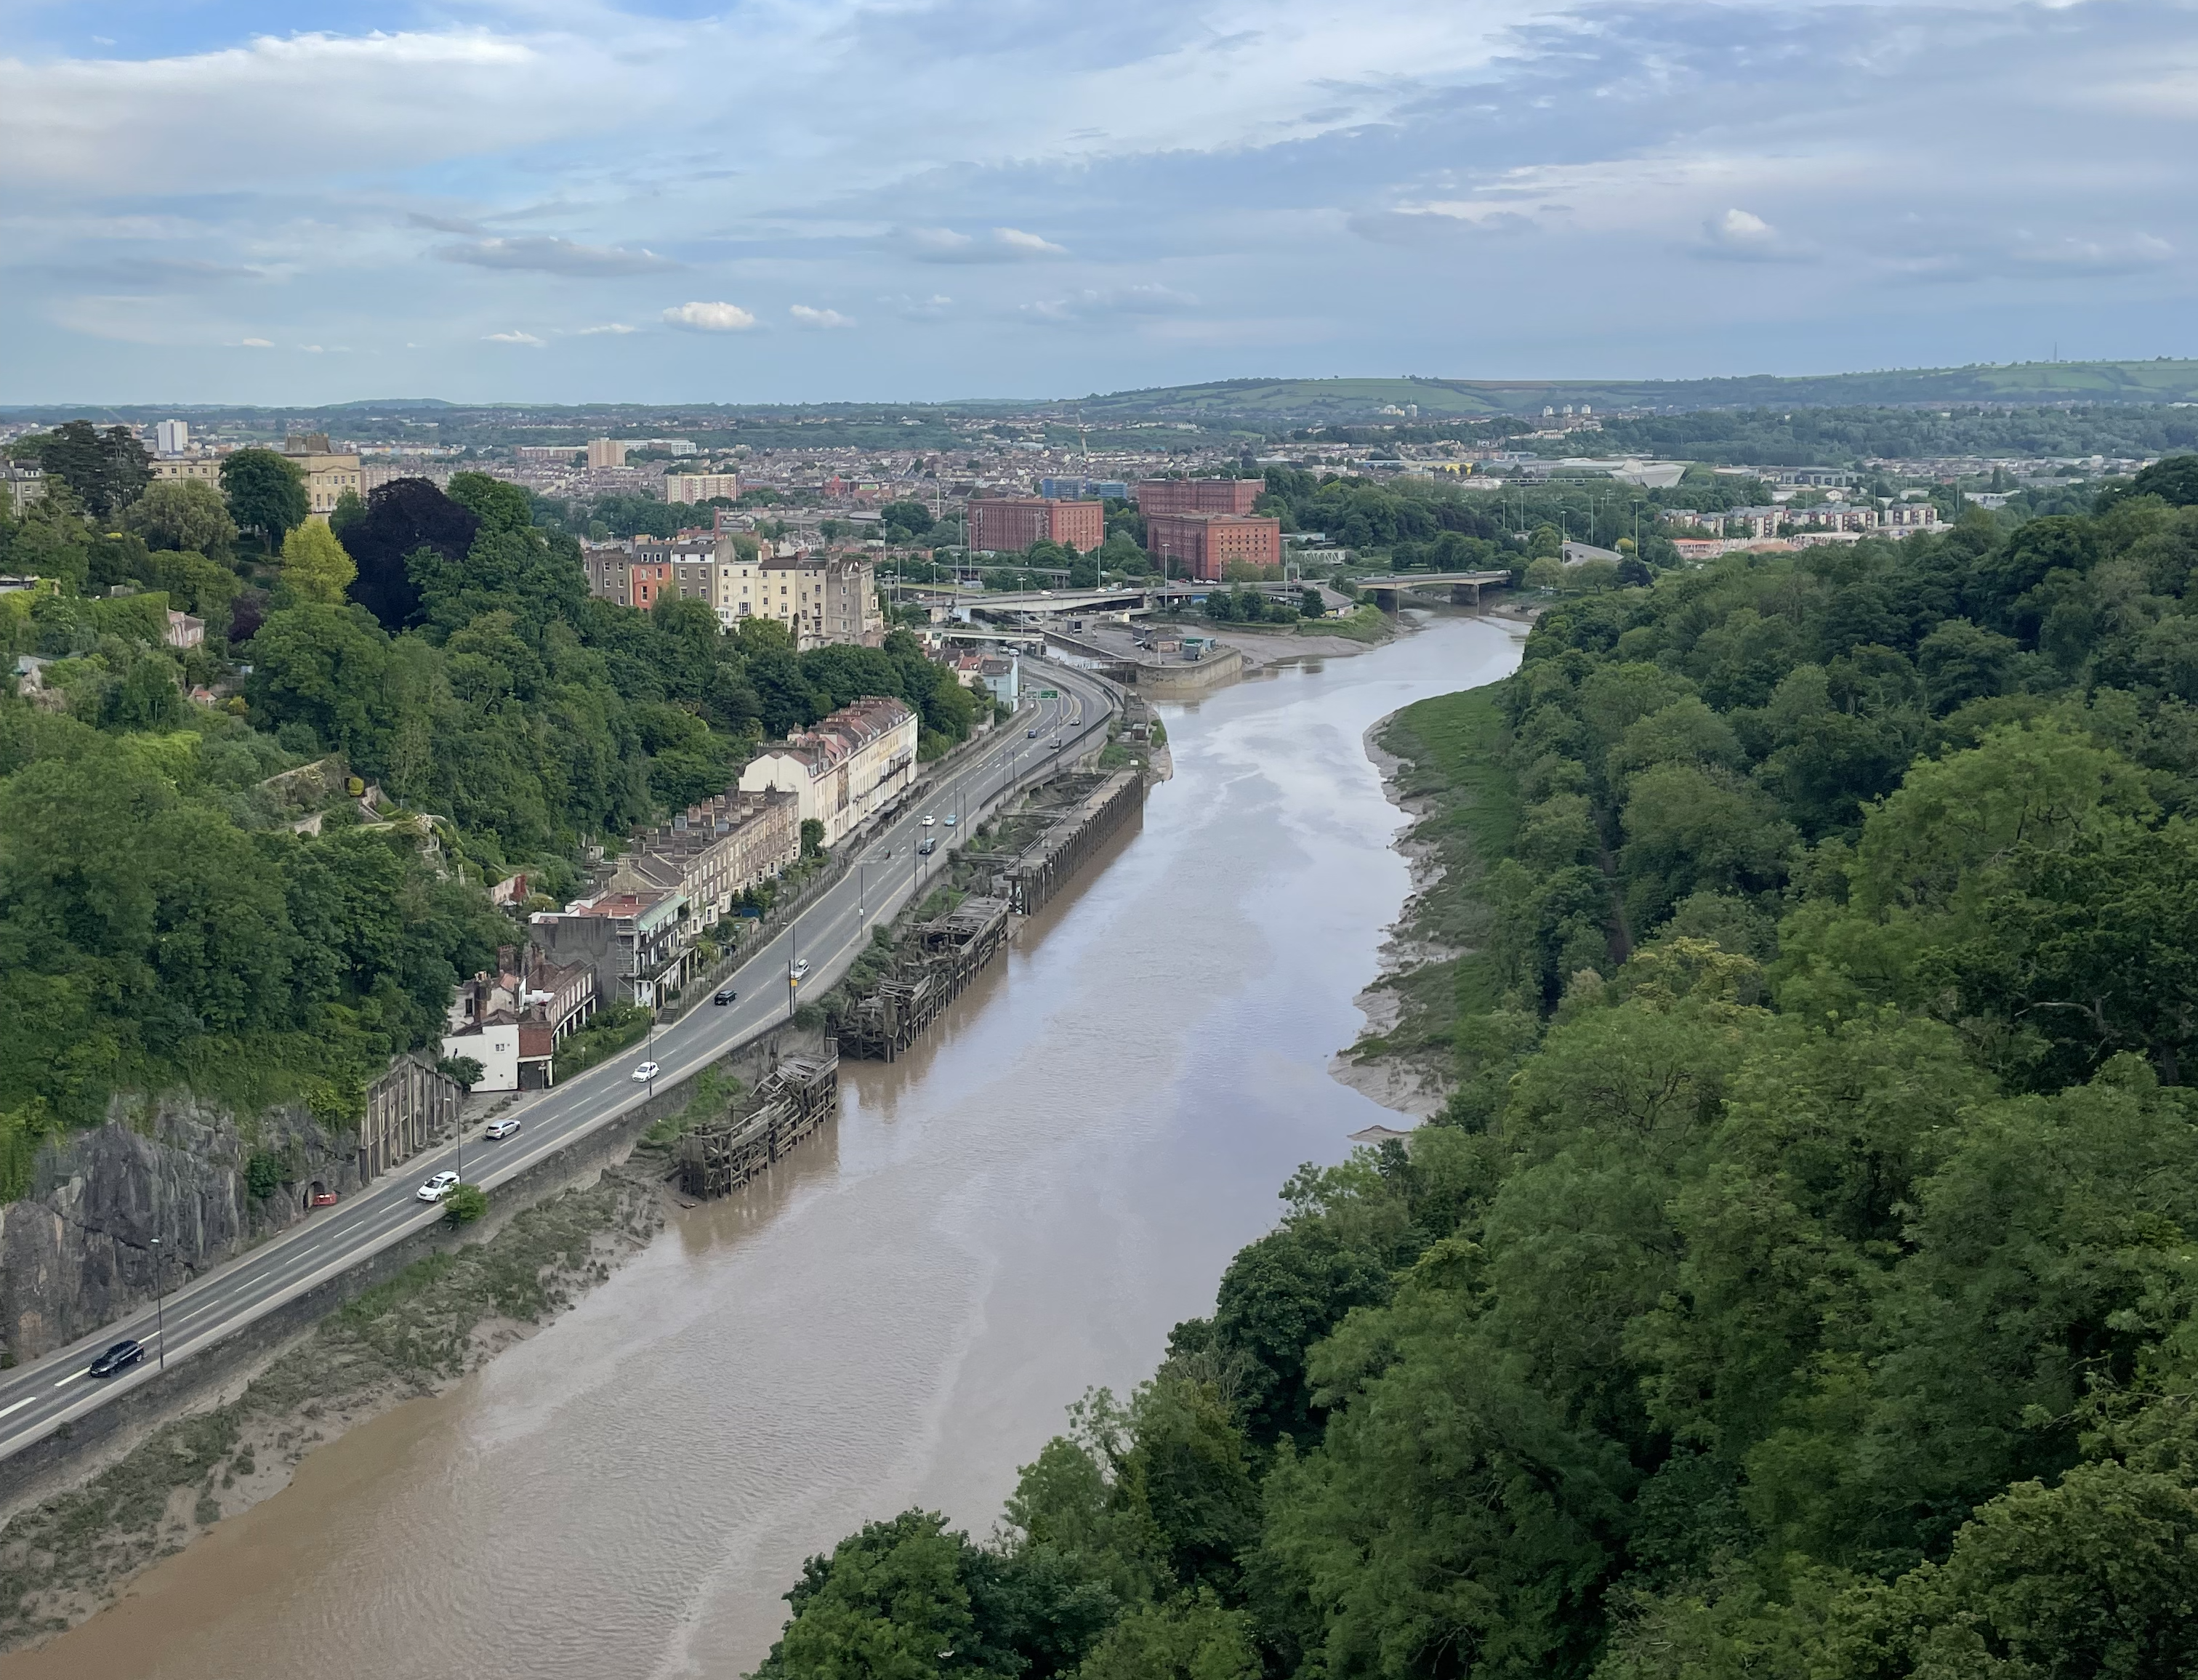 The view from Bristol Suspension Bridge looking towards the city